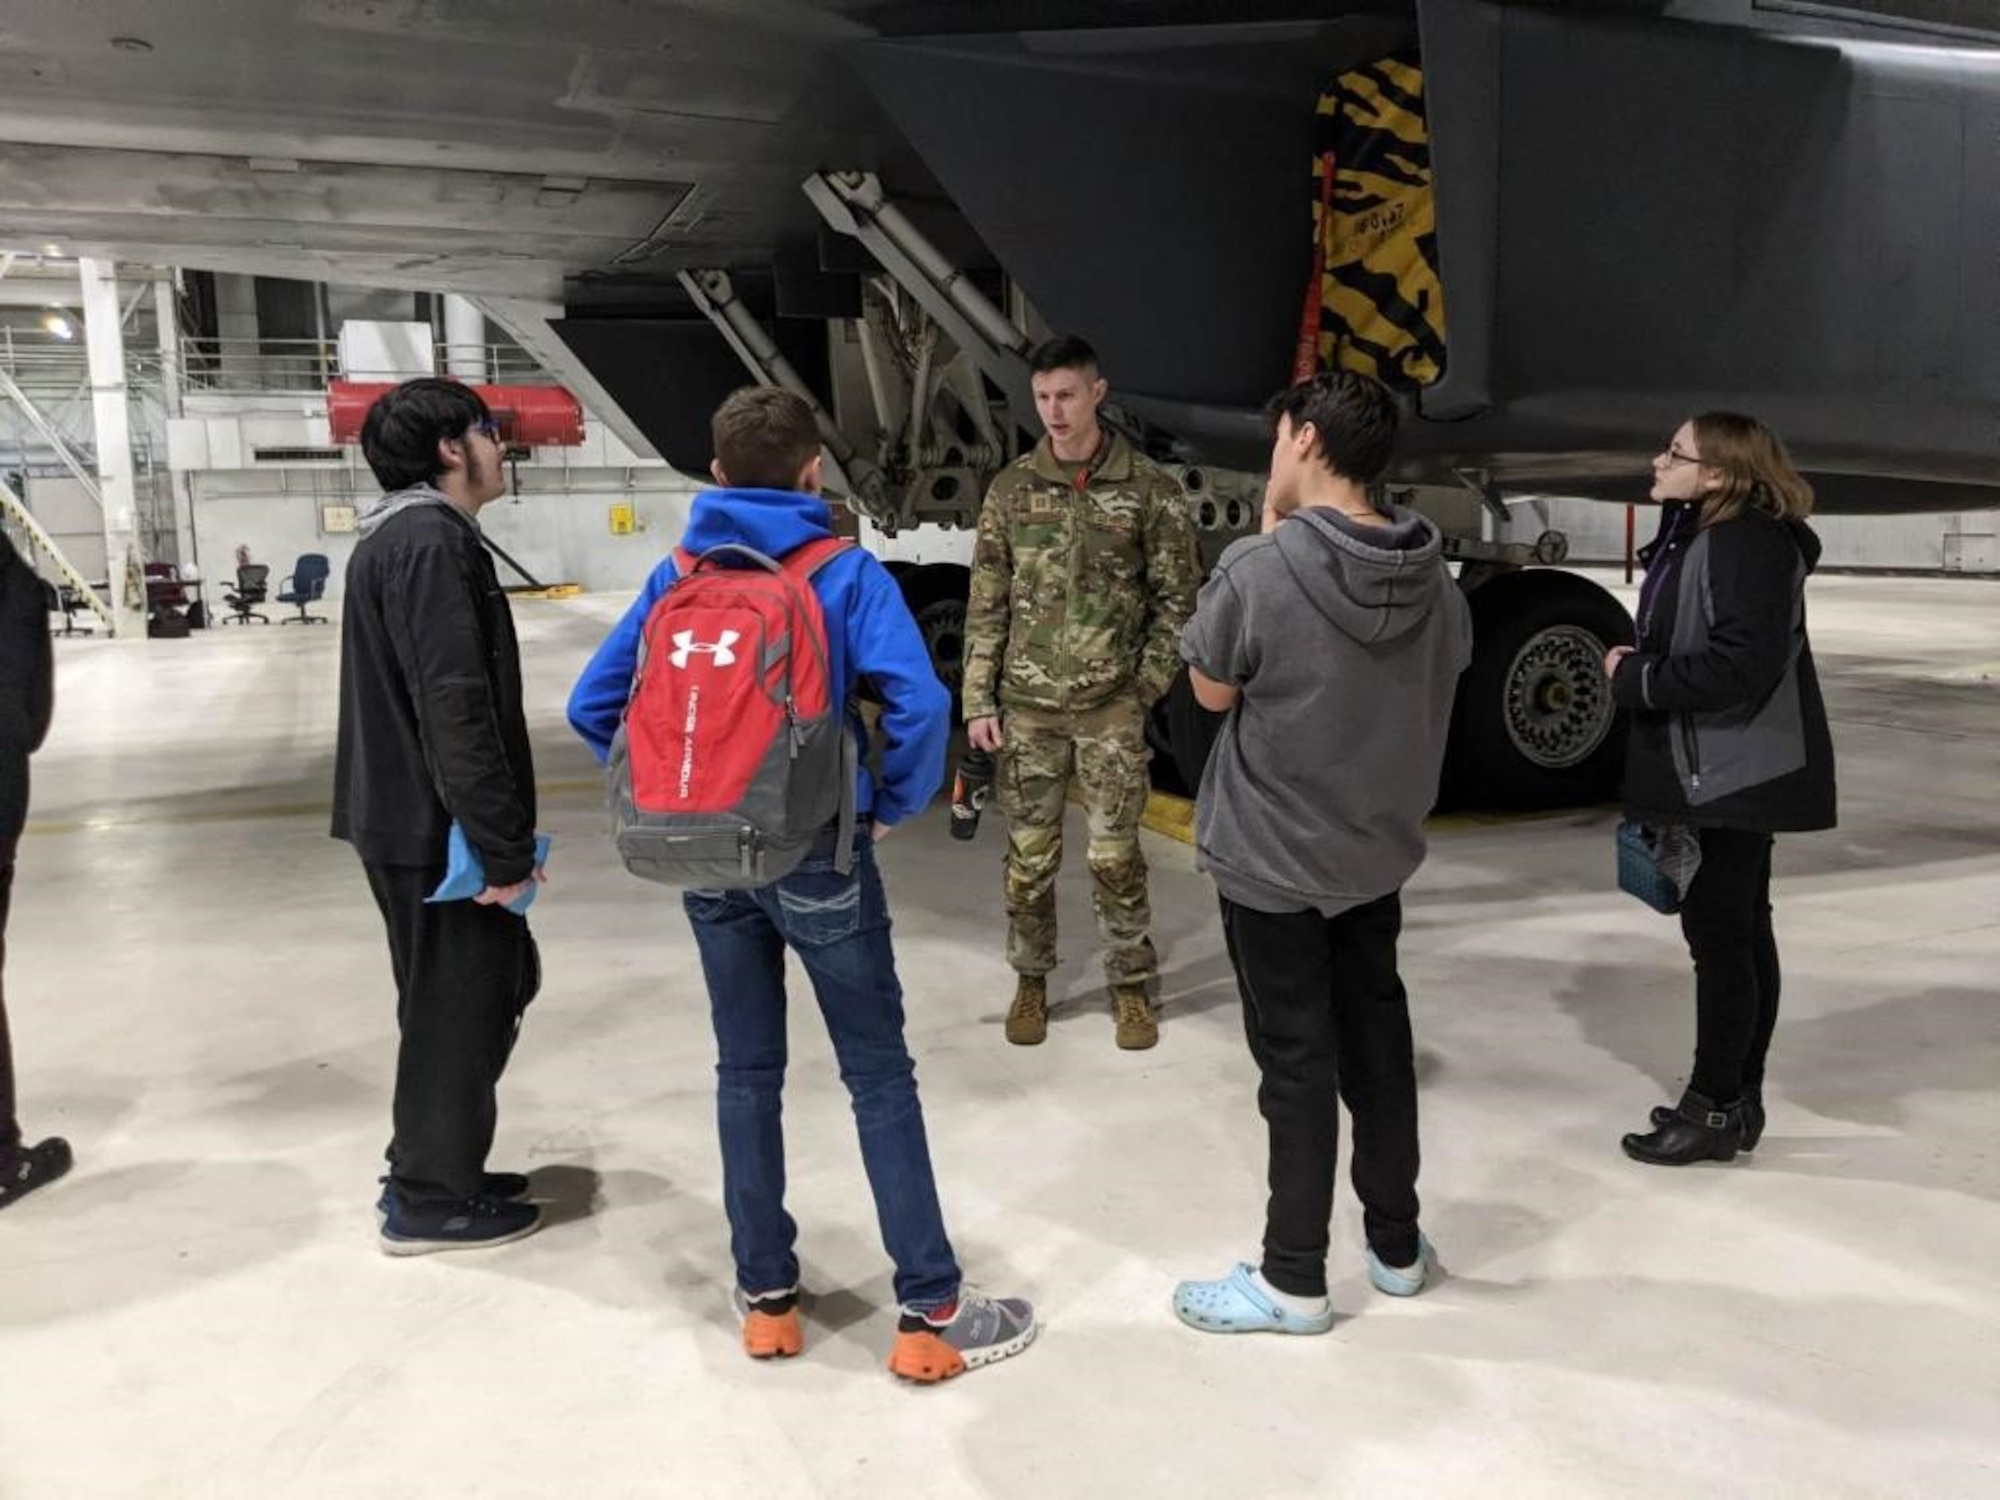 Capt. John Jordan, 34th Aircraft Maintenance Unit officer in charge, discusses the B-1B Lancer with students from a local middle school as part of a base tour at Ellsworth Air Force Base, South Dakota, Dec. 5, 2023.